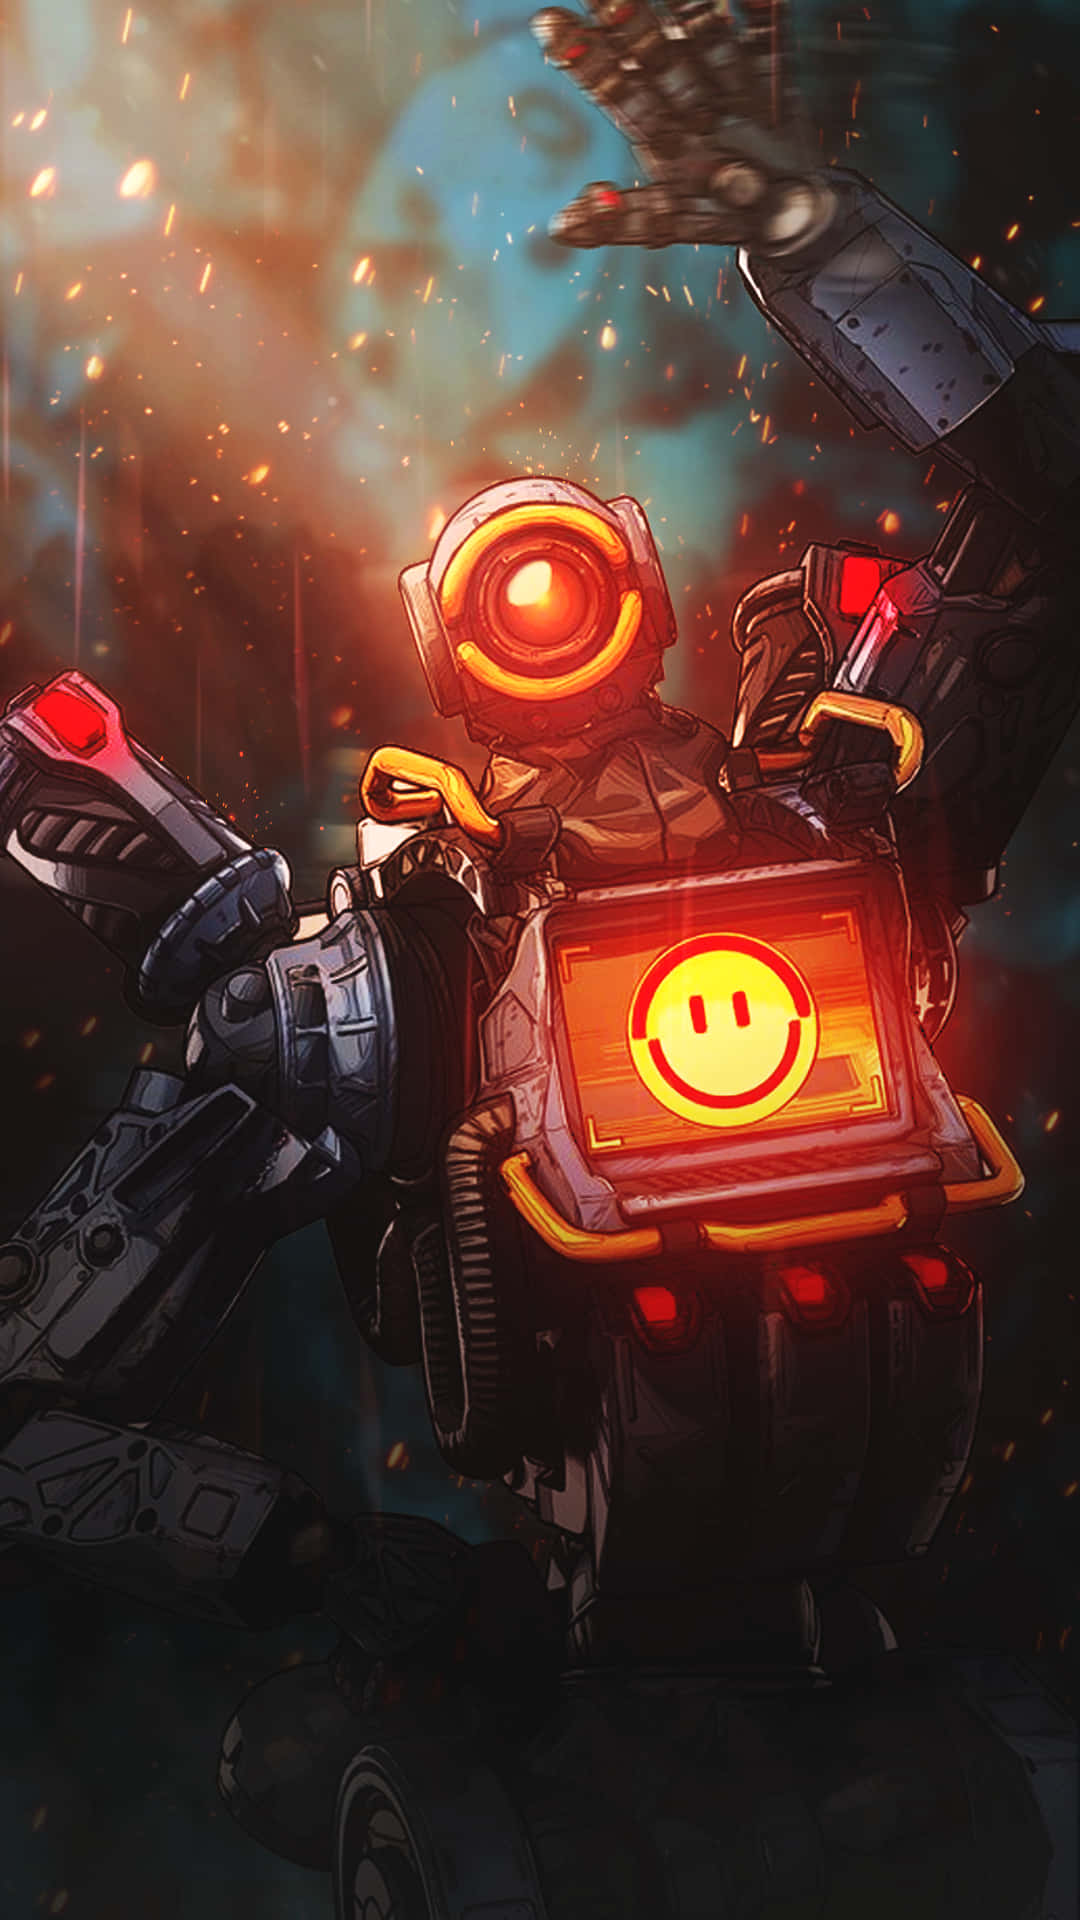 Fly with Pathfinder in Apex Legends Wallpaper